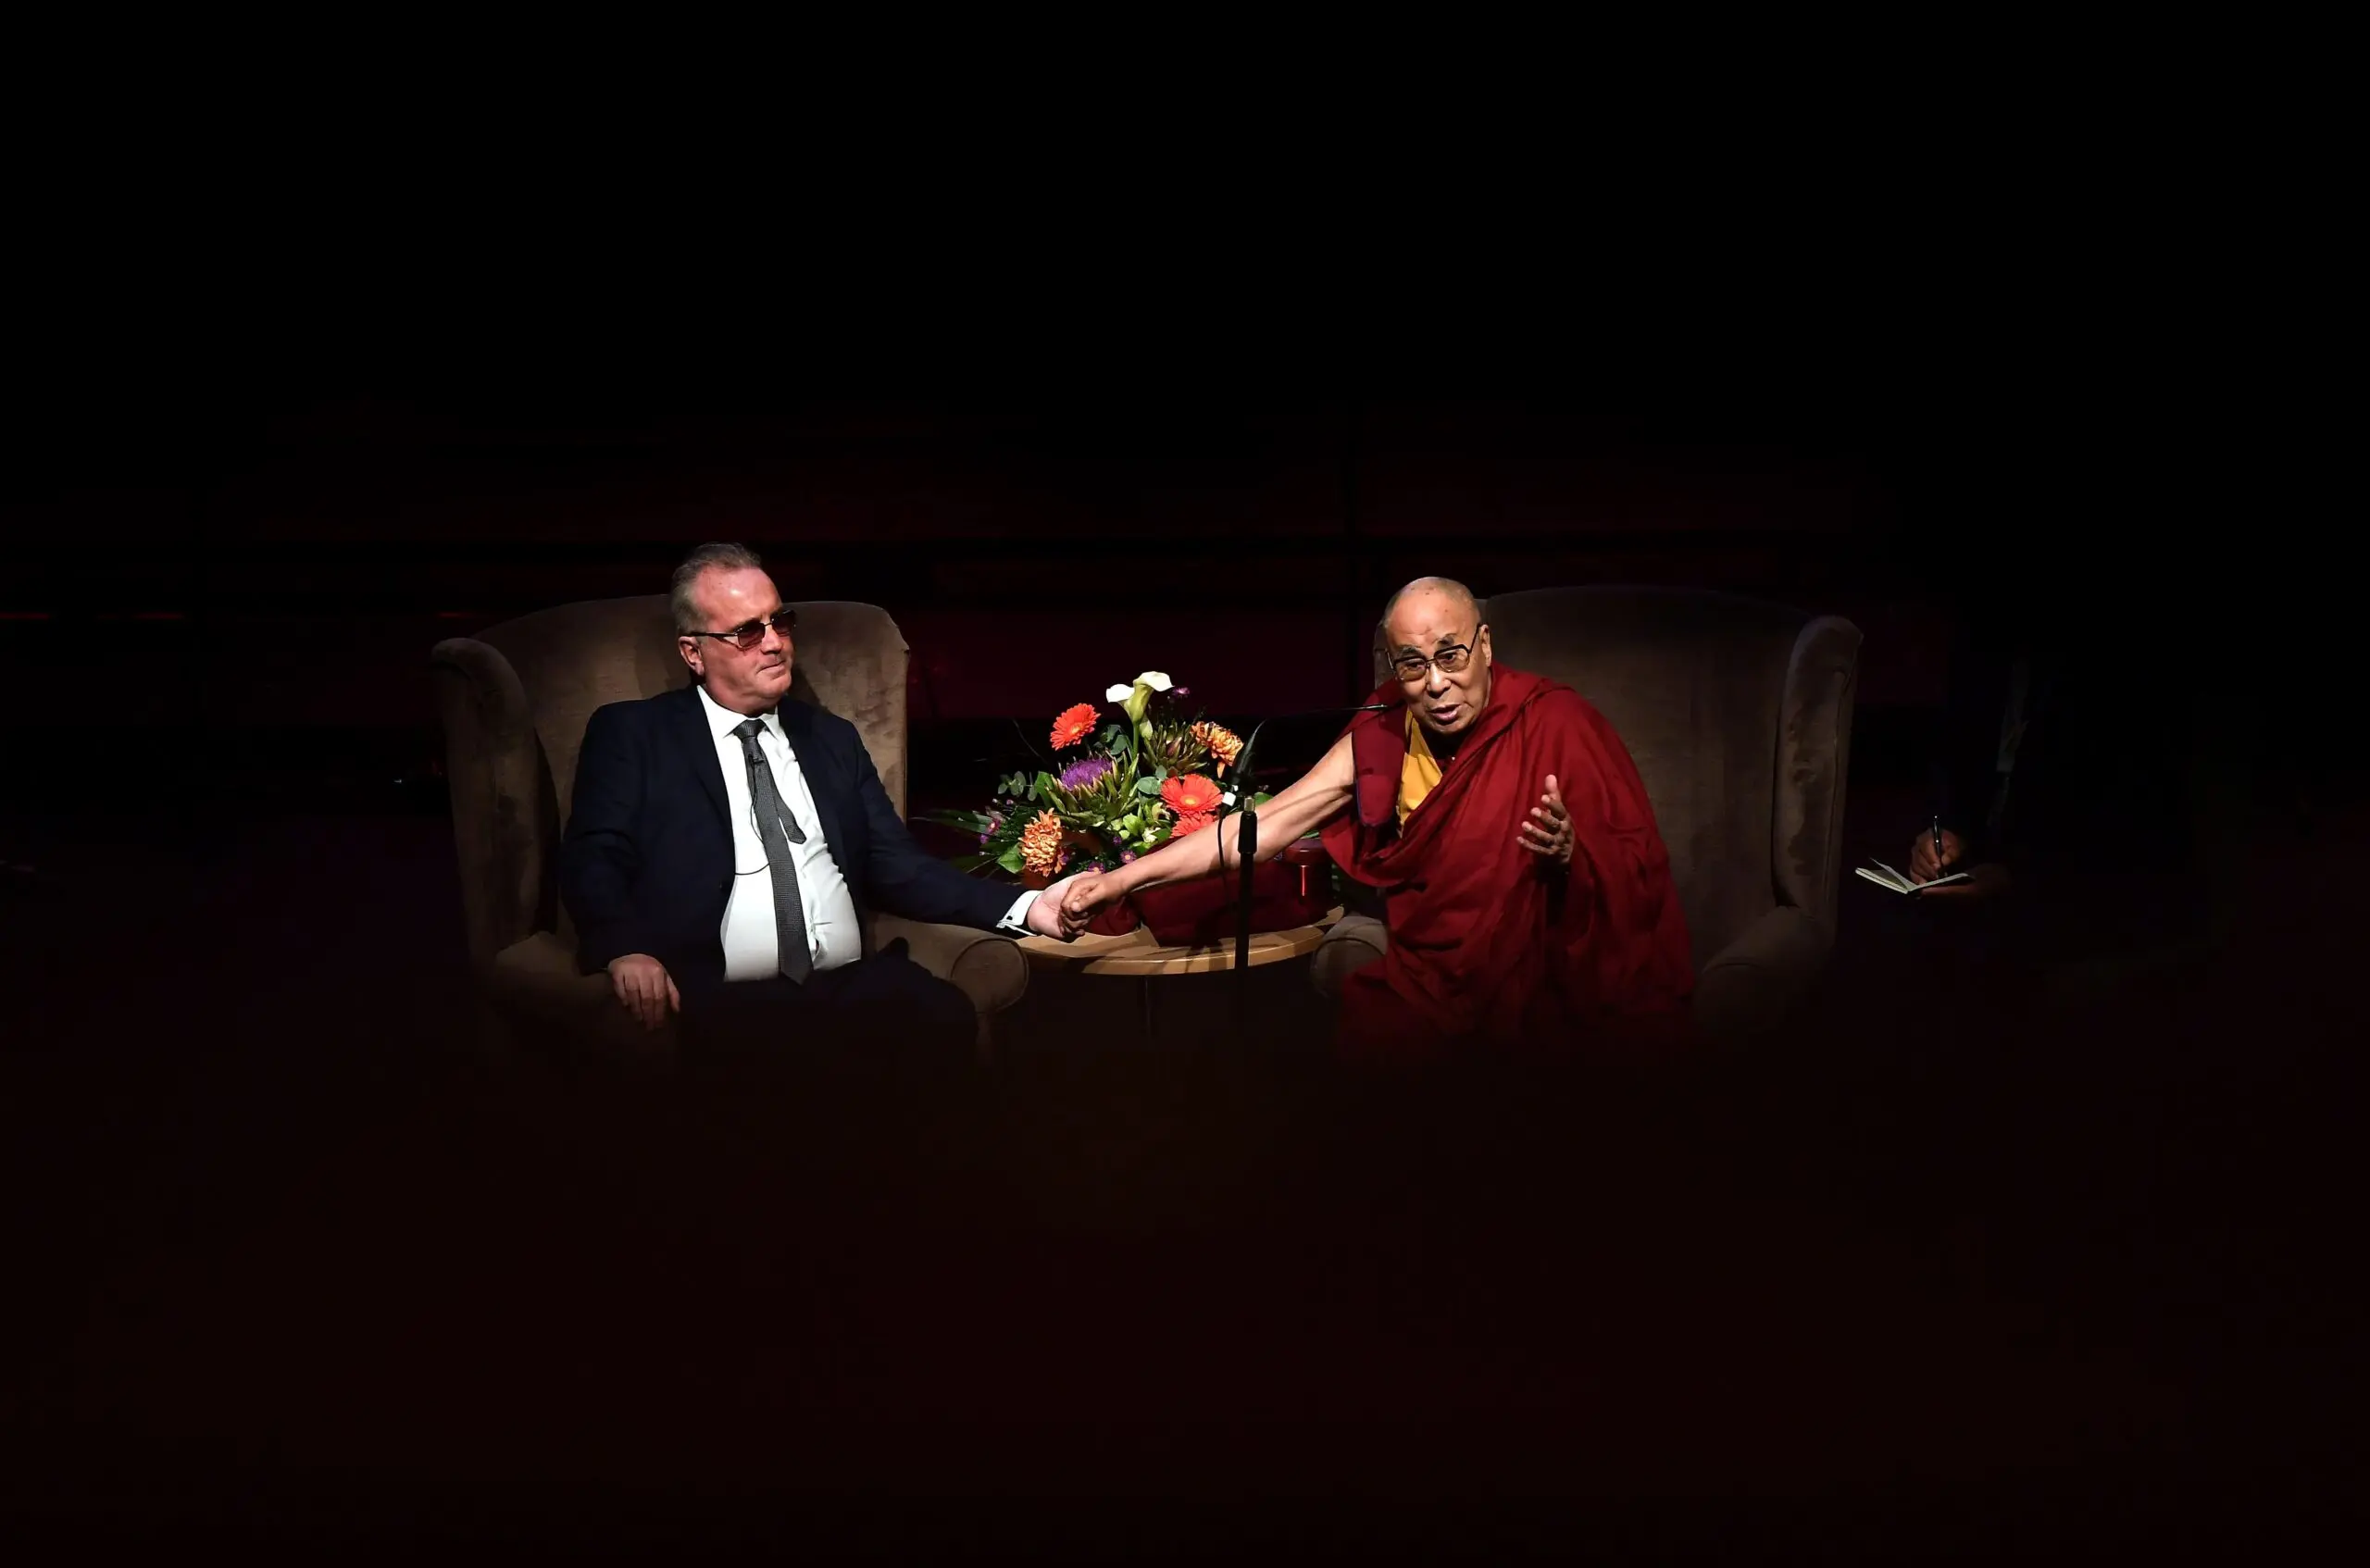 The Dalai Lama holds Richard Moore's hand as he gives a talk about compassion to celebrate 20 years of Moore's Children in Crossfire initiative on September 10, 2017 in Derry, Northern Ireland.